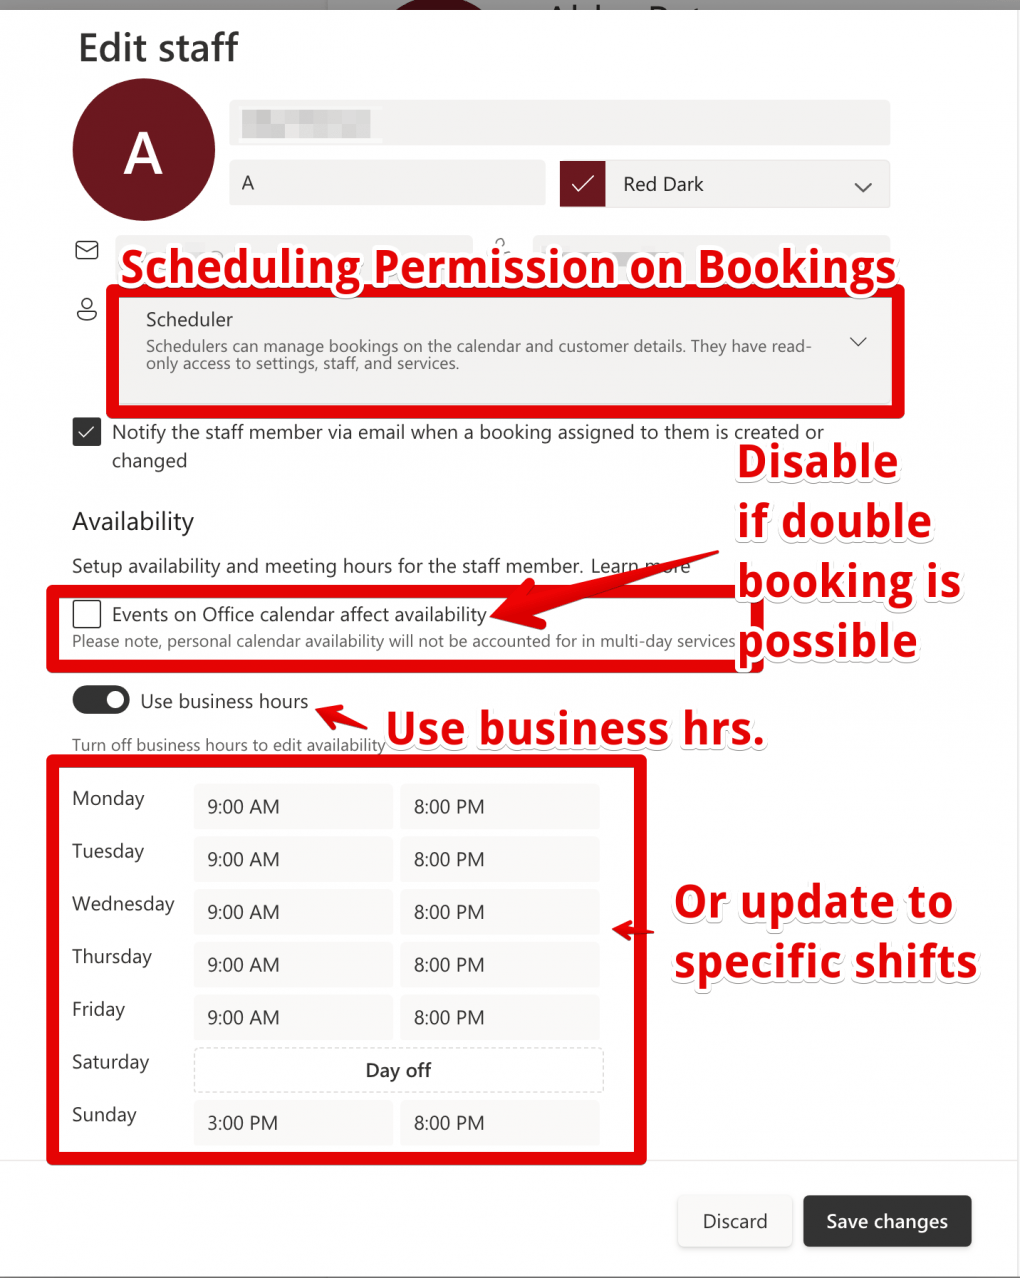 A lot going on here. Under Edit Staff setting Scheduling permissions to something lower than admin (eg Scheduler). Unchecking "Events on Office calendar affect availability" to allow for double booking of services. And enable Use Business hours or disable to have this staff member update for their shifts. 